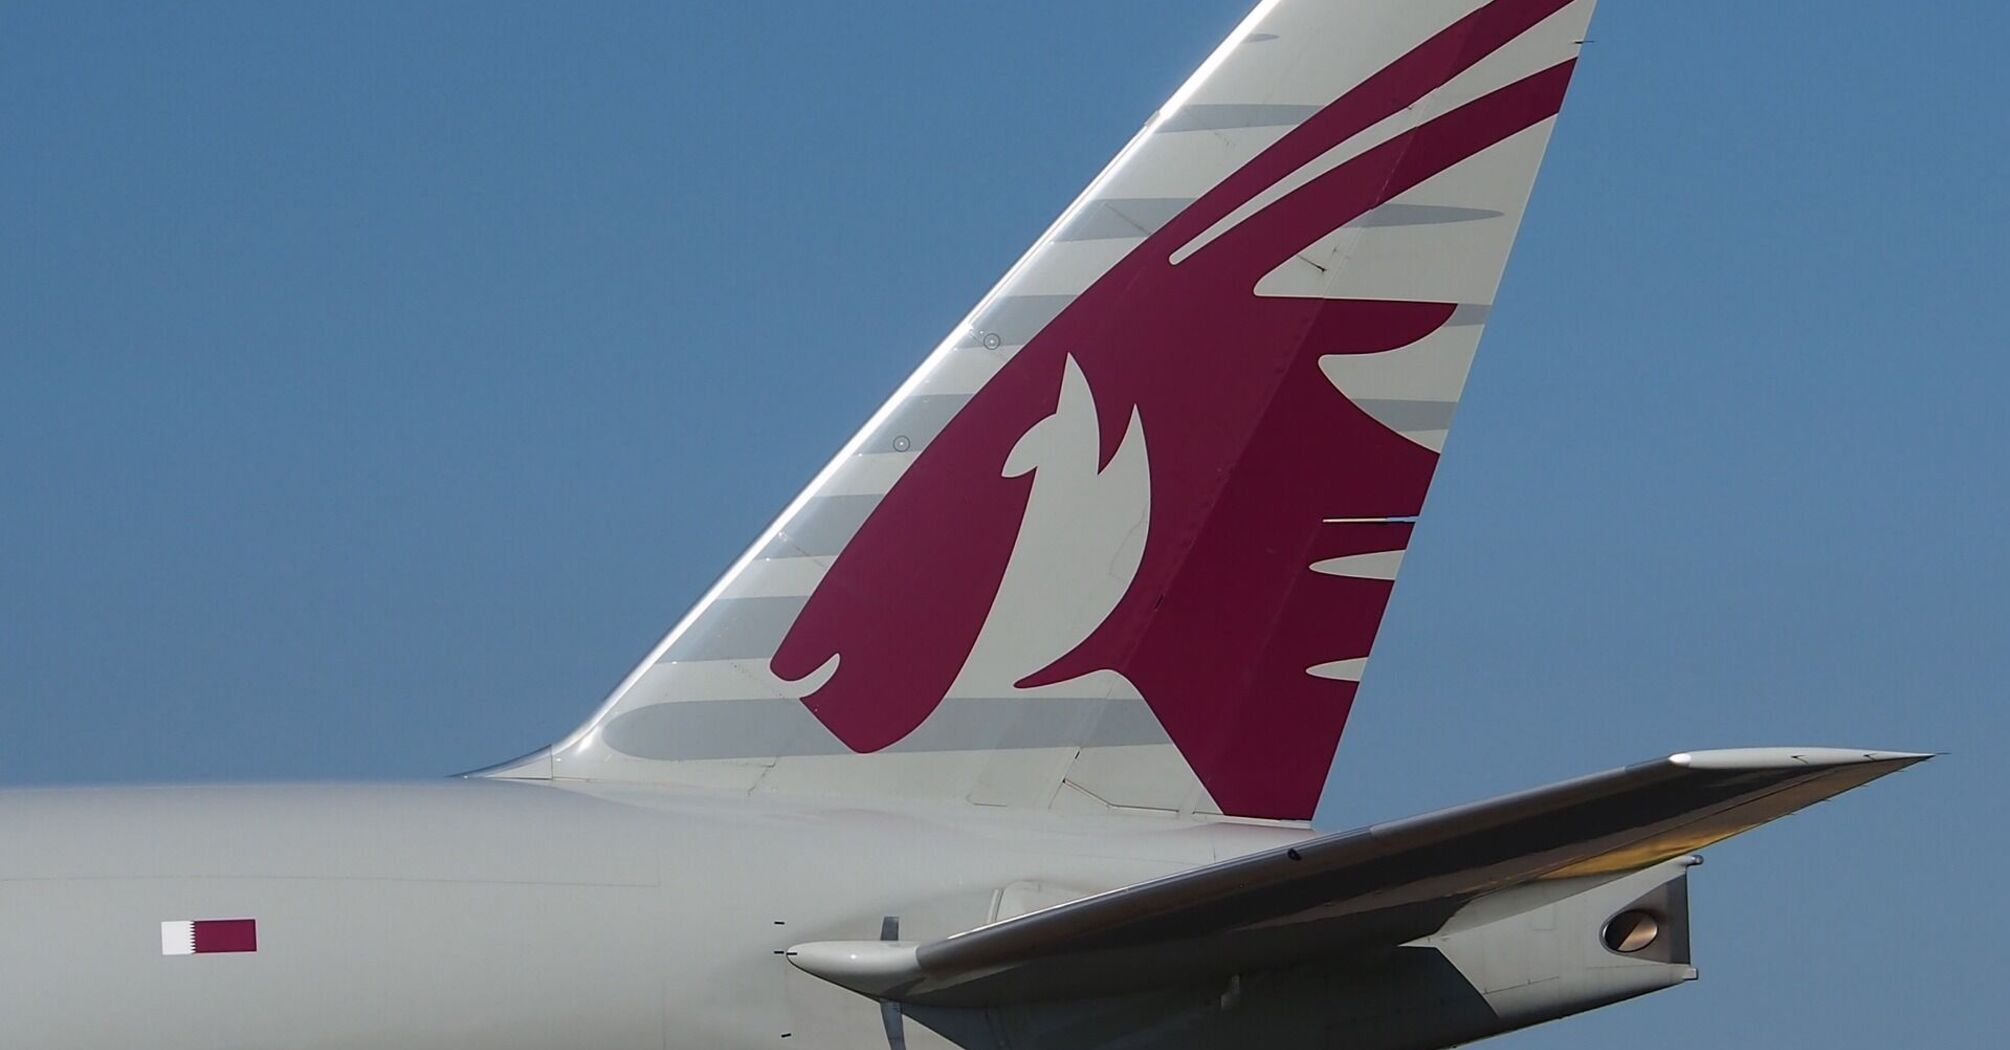 Close-up of Qatar Airways aircraft tail fin with logo